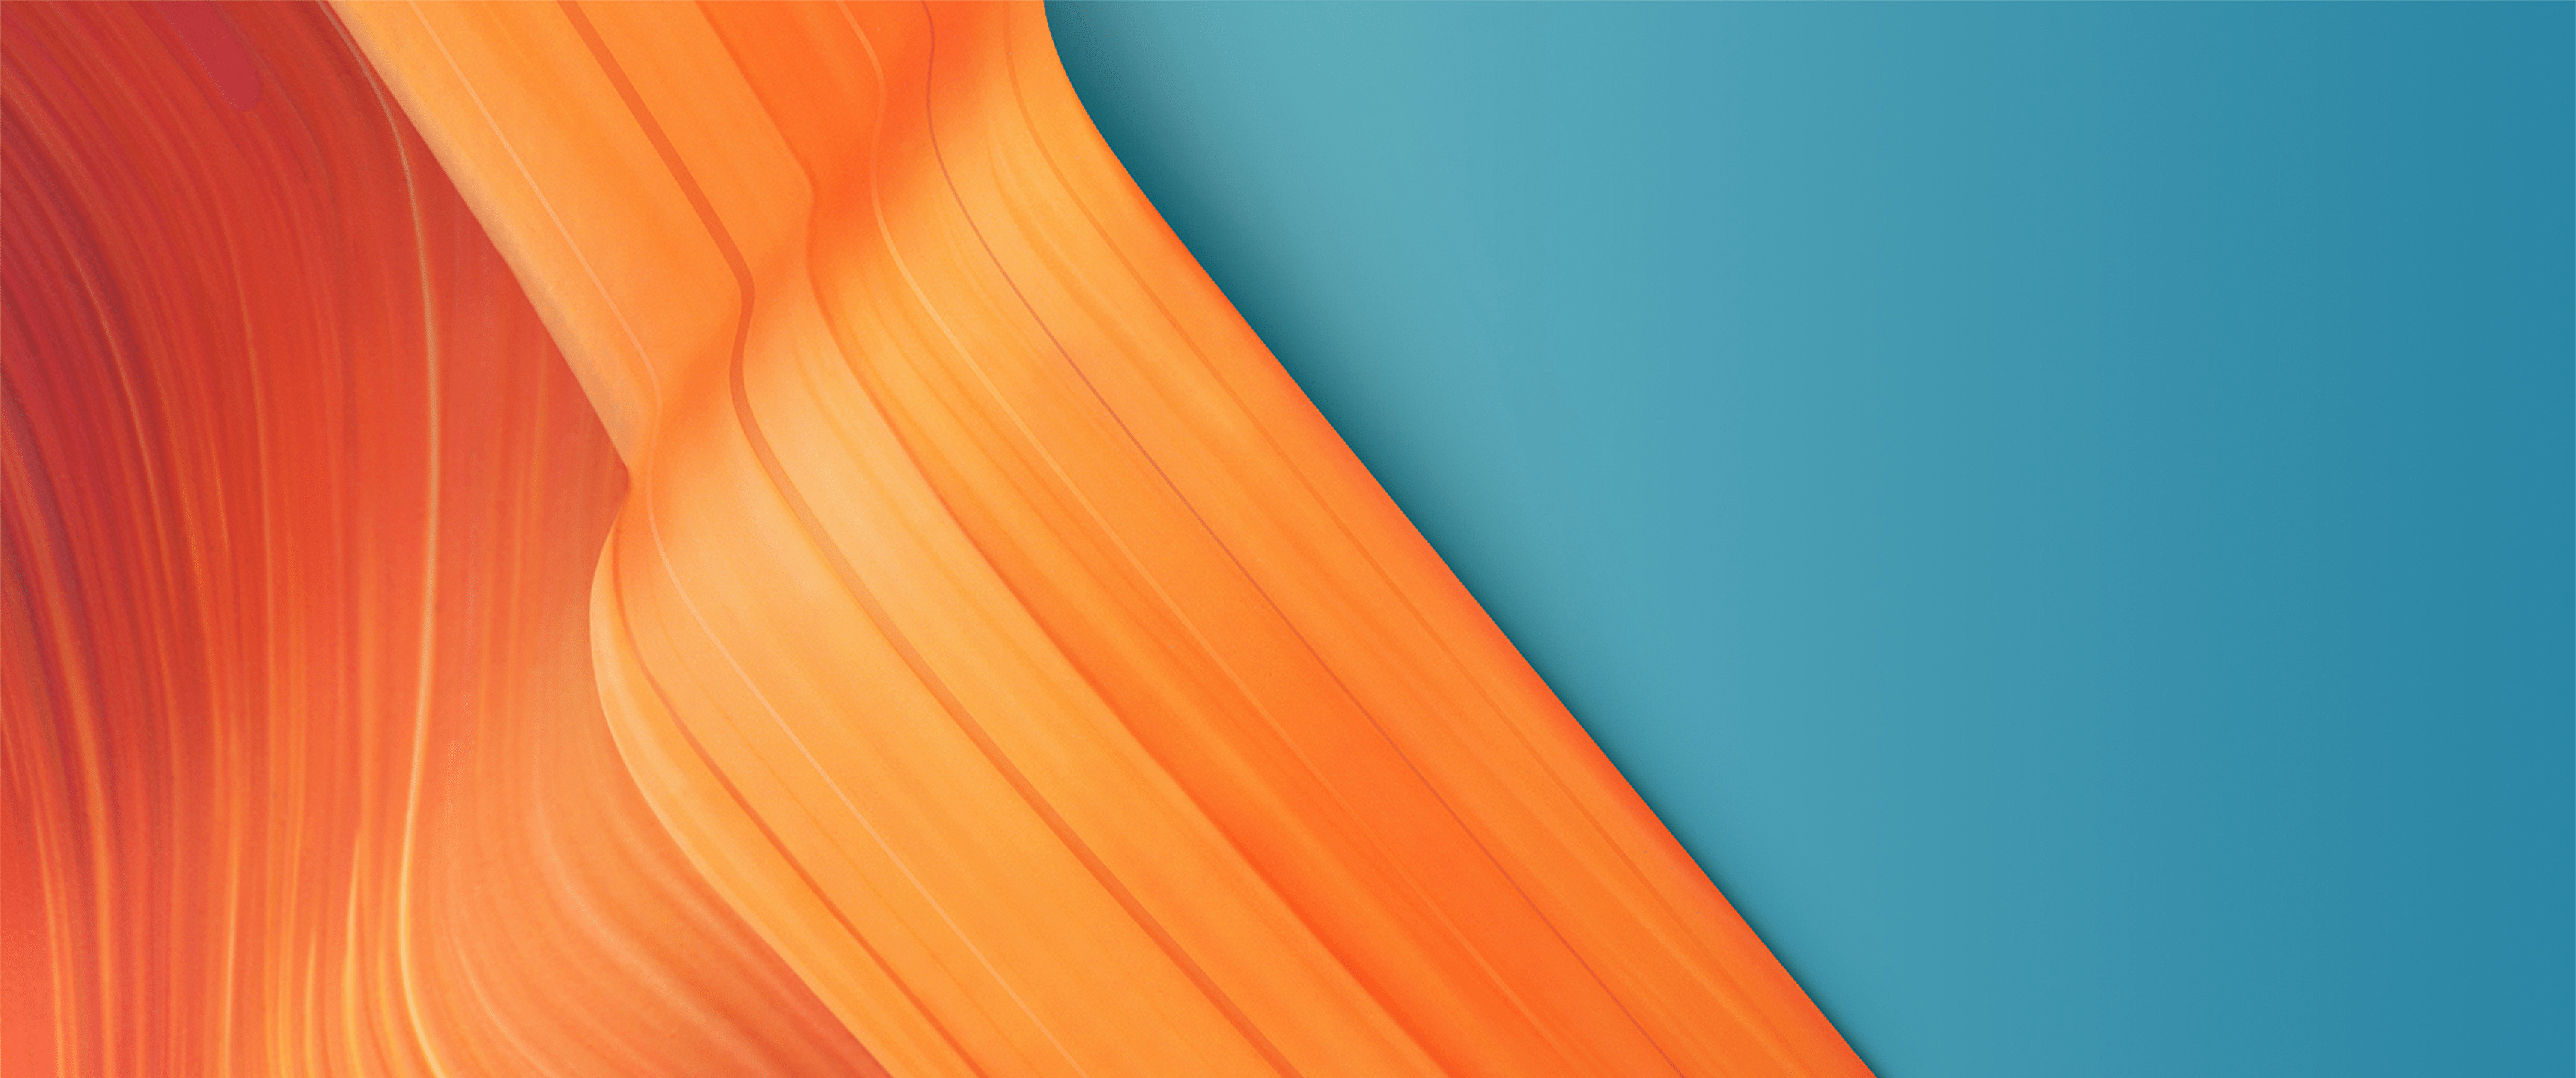 A colorful abstract wallpaper, with an orange wave on a blue background. - 3440x1440